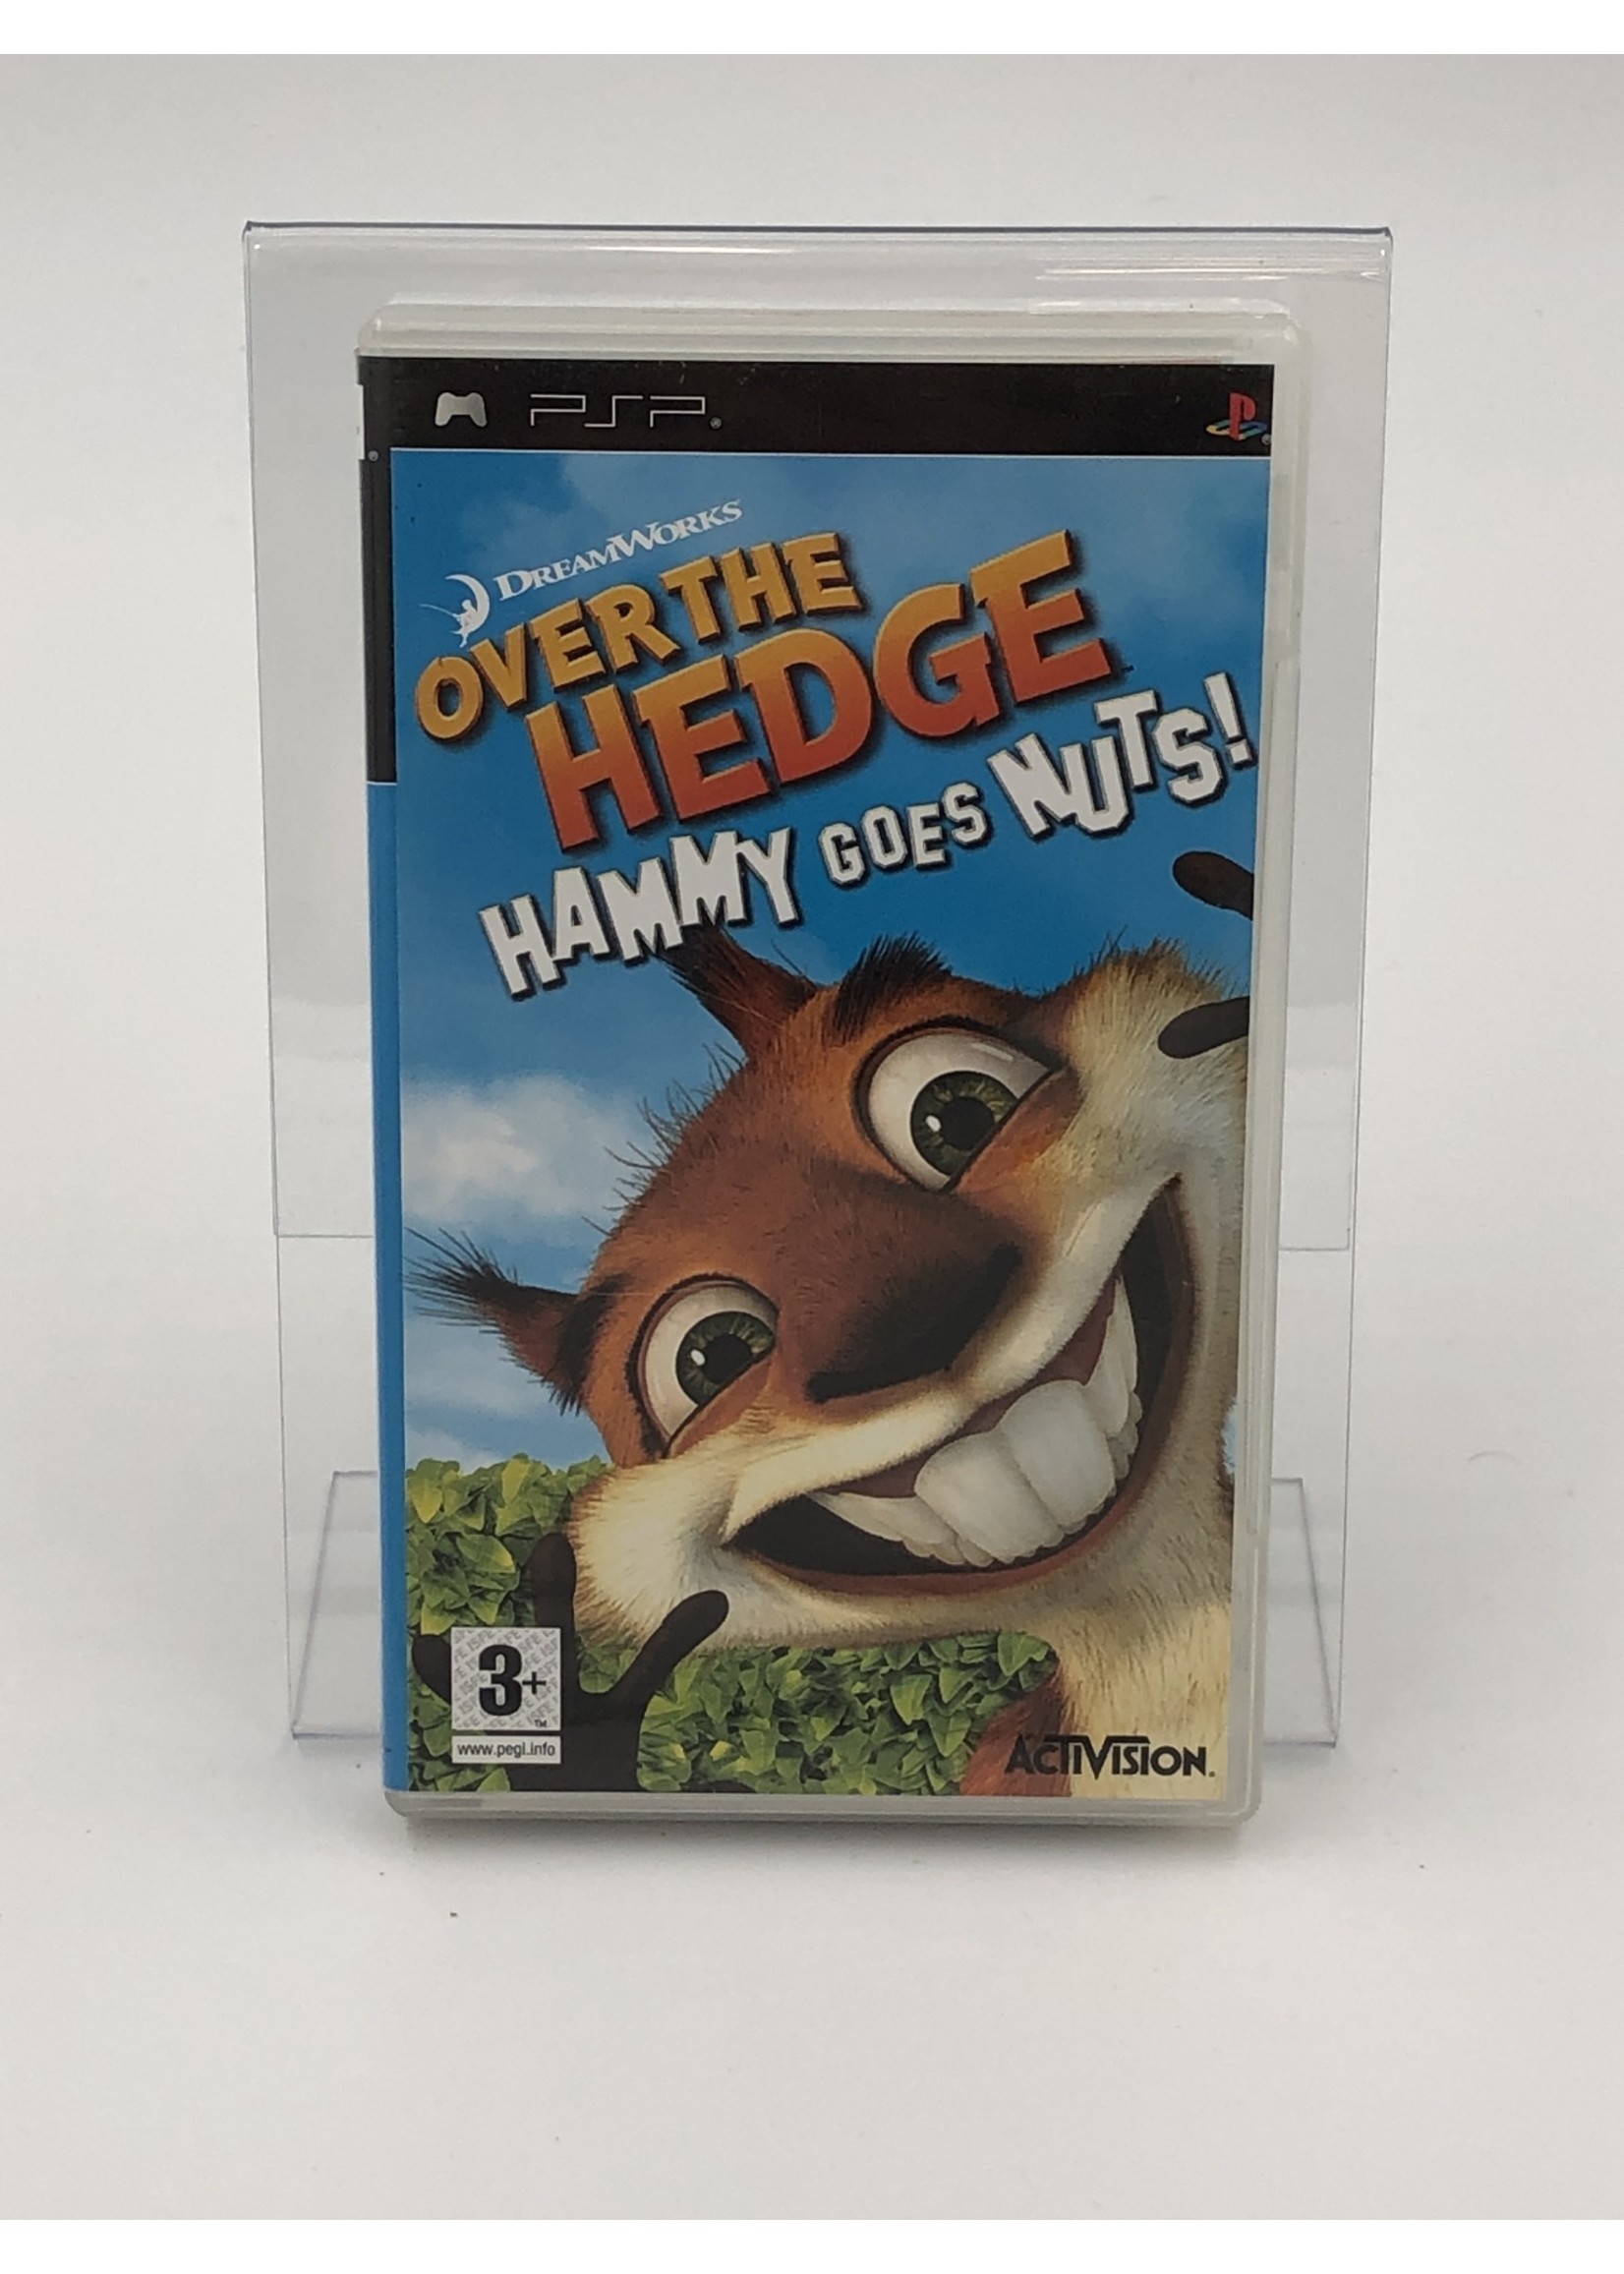 Sony   Over The Hedge: Hammy Goes Nuts!